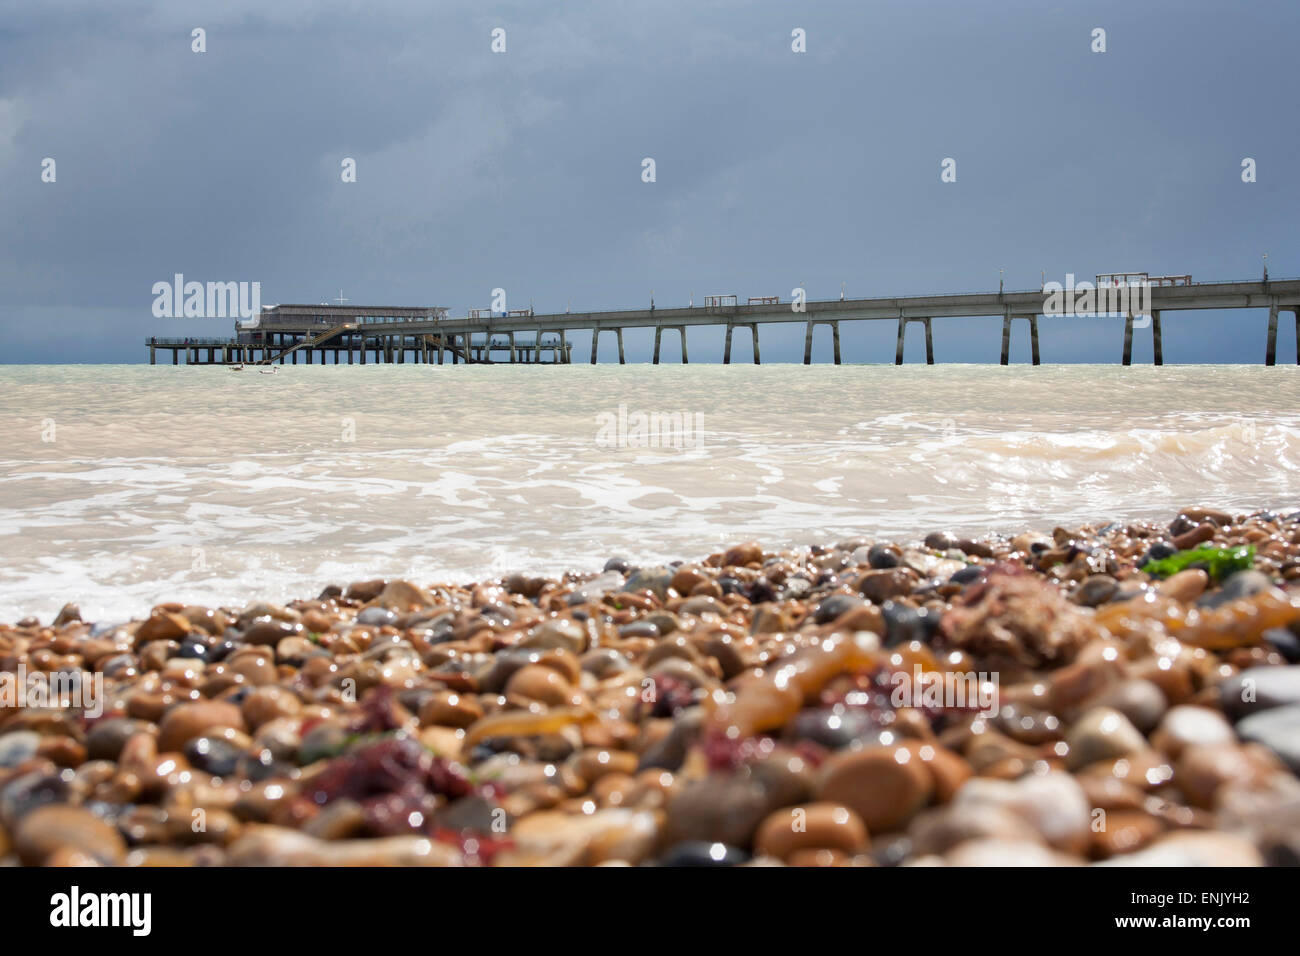 Deal beach in Kent showing pier, shingle and sea against a dark grey cloudy rainy sky Stock Photo